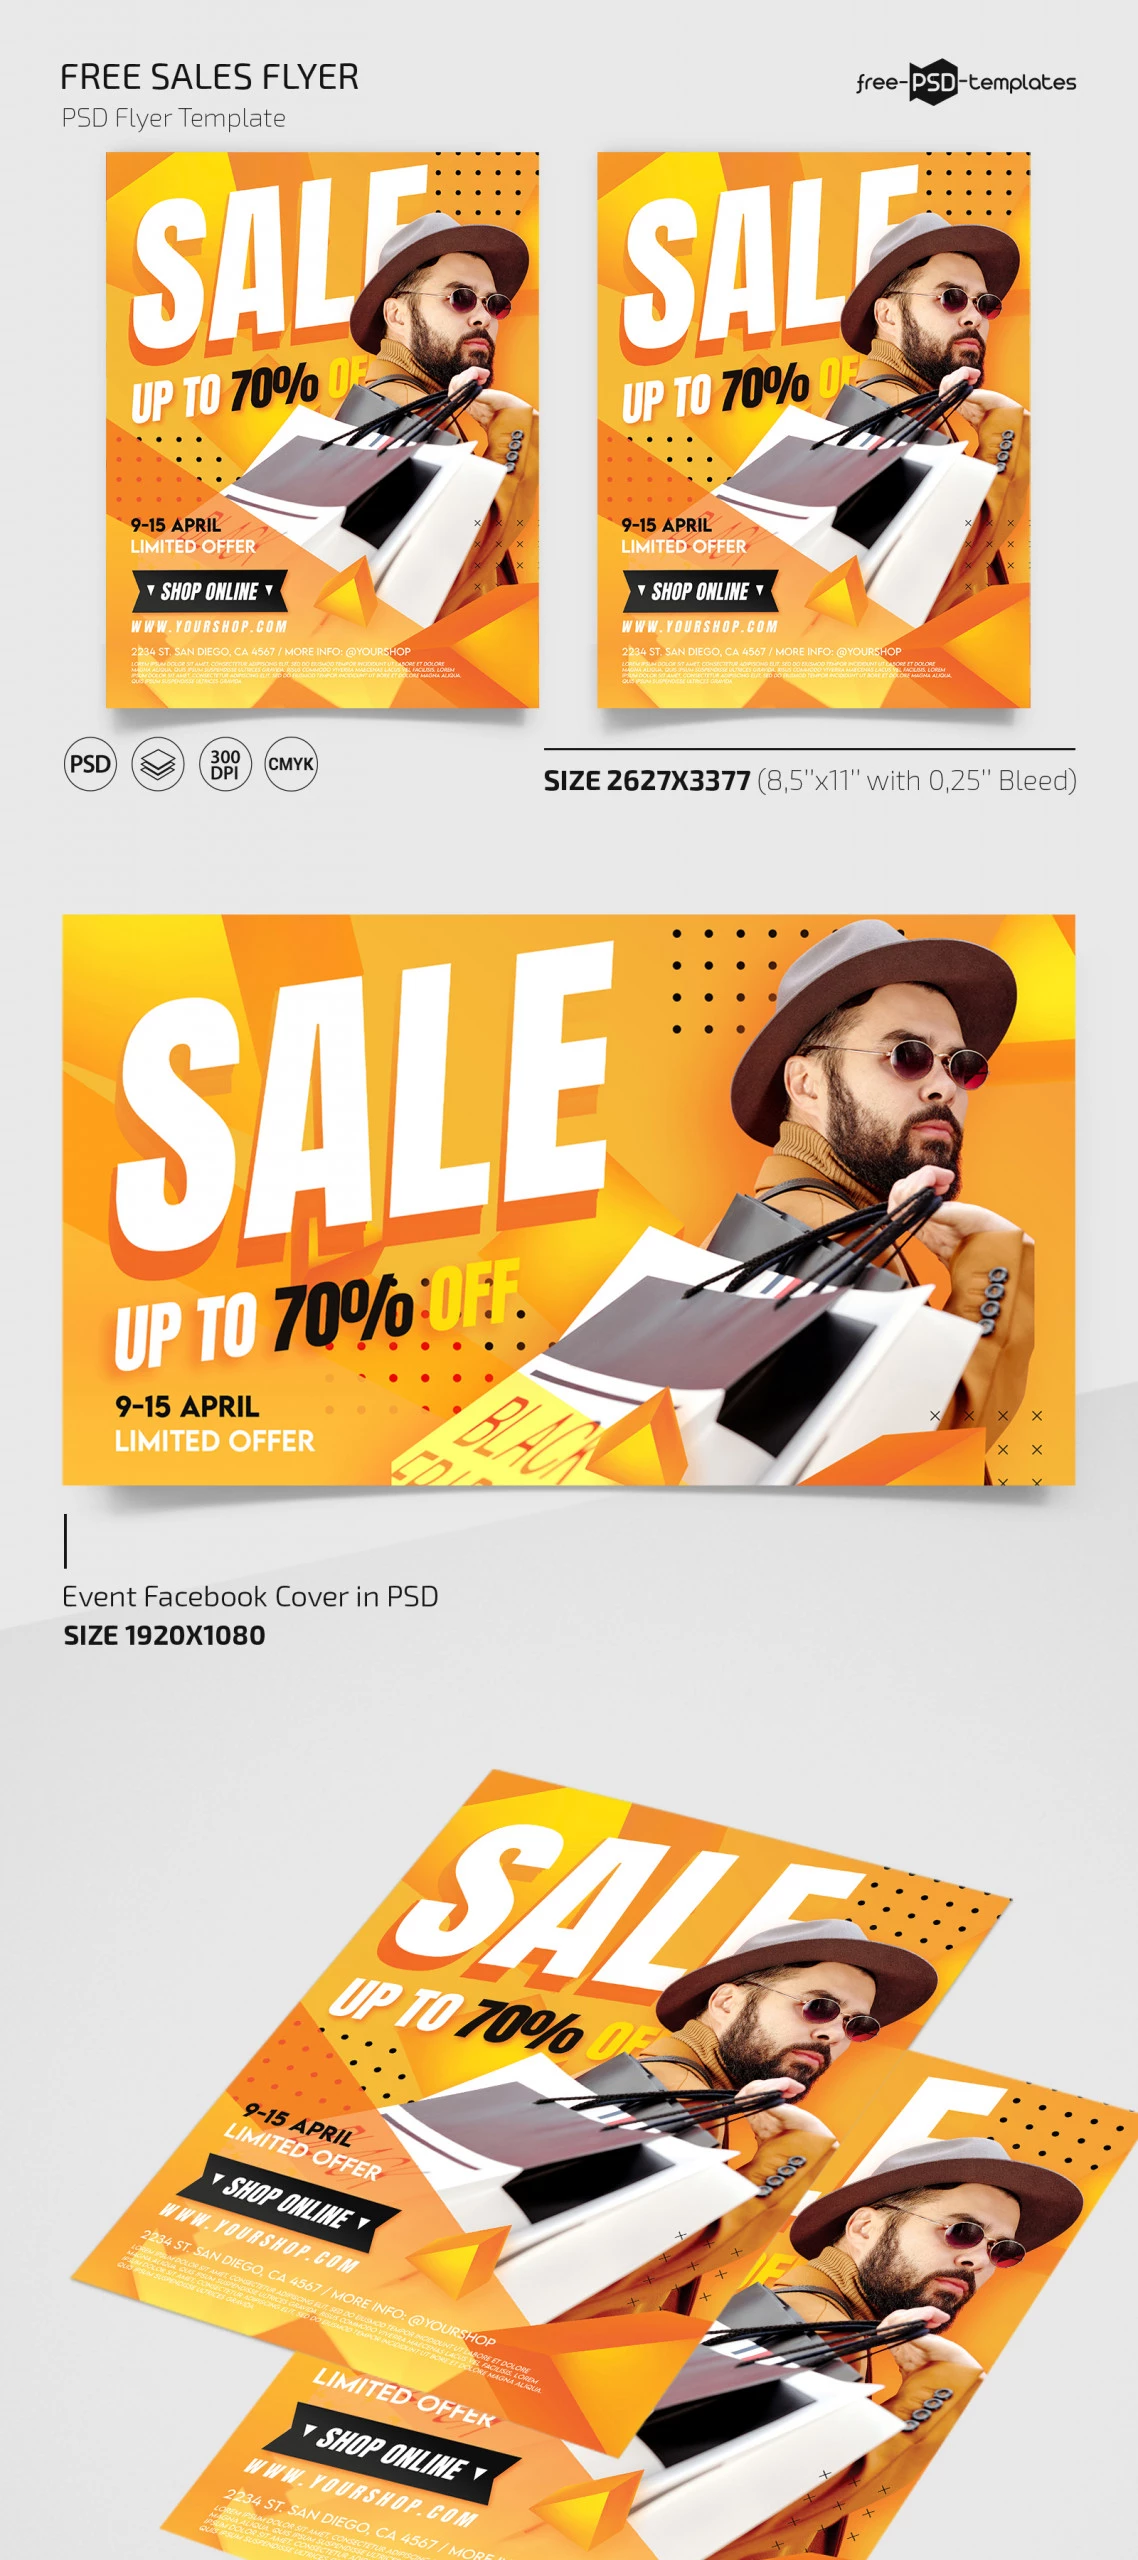 Free Sales Flyer Template for Photoshop (PSD)